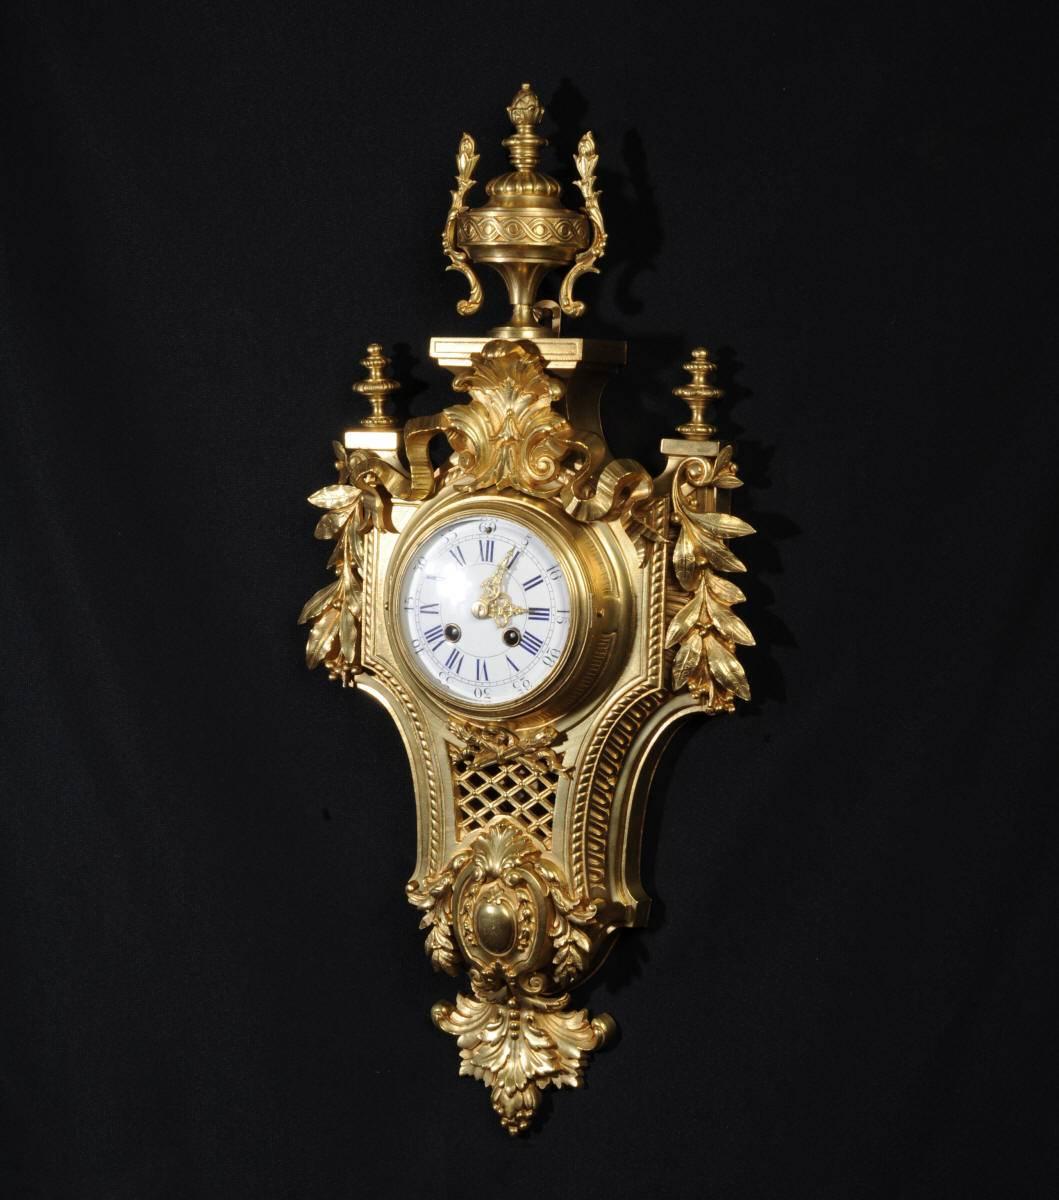 A stunning original antique French cartel wall clock by the famous maker Japy Freres. It is Louis XVI in style, classical case with acanthus swags, a large acanthus motive above the dial and a large urn to the top. The front is fretted to allow the